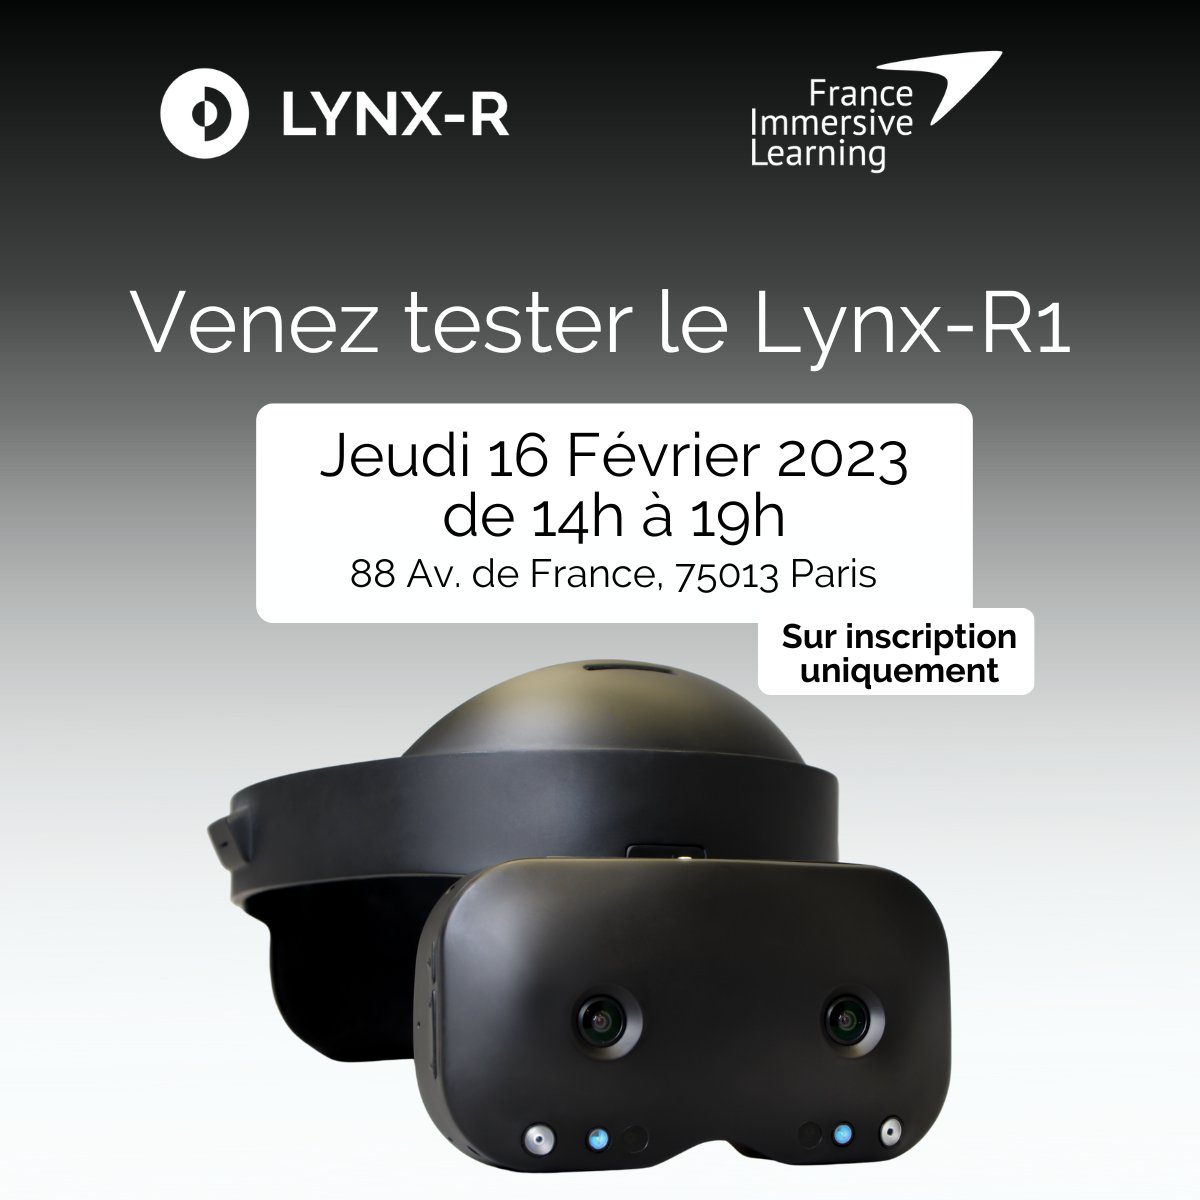 Book a slot to try the Lynx_R1 > bit.ly/3CU1DbJ The Lynx R-1 will be at France Immersive Learning come join us for a demonstration session.